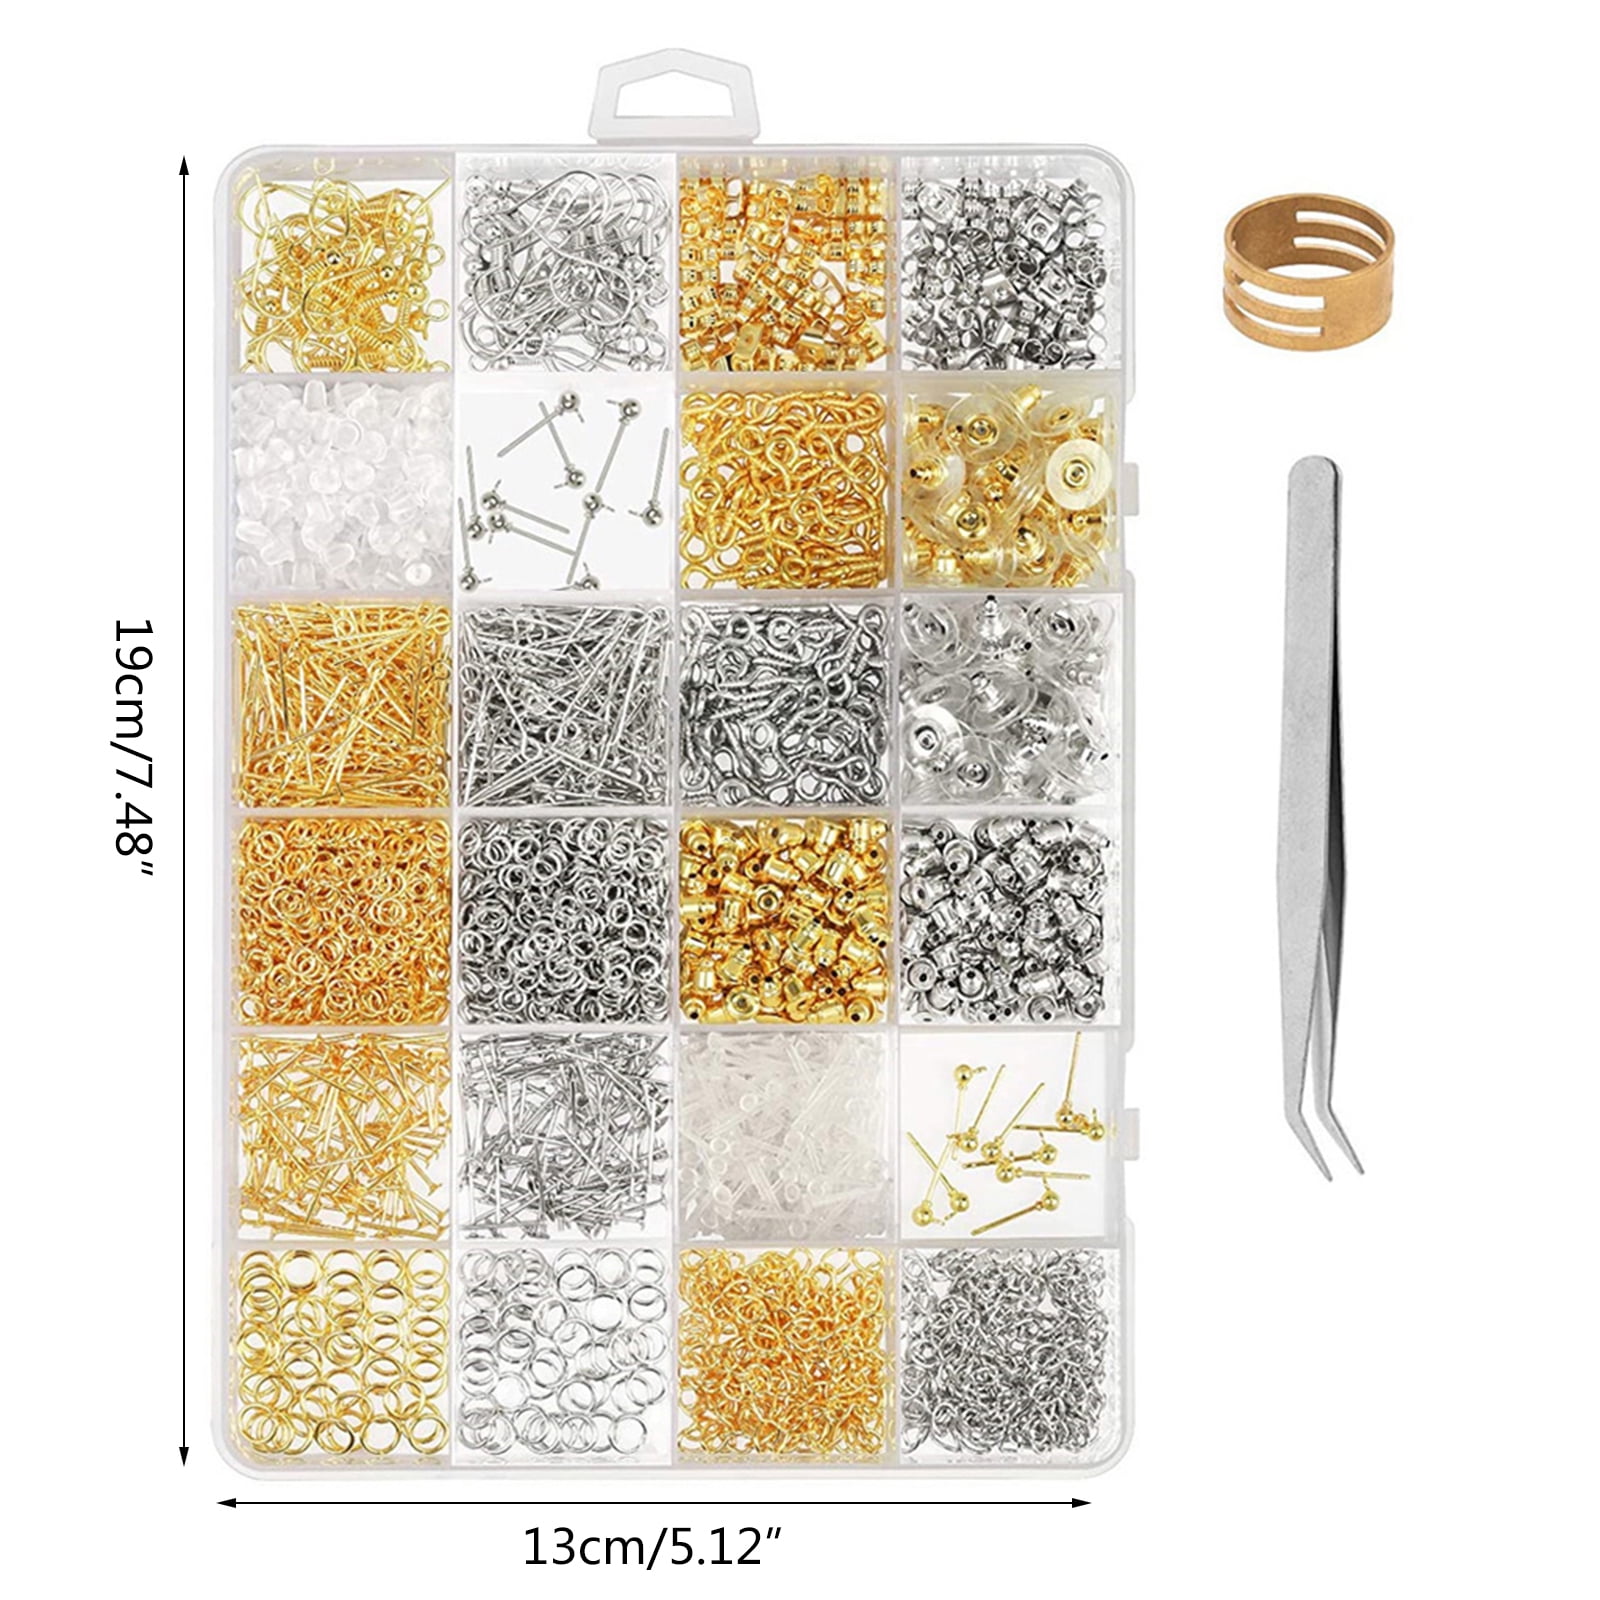 Earring Making Supplies Kit, Caffox 2900pcs Earring Hardware Pieces Repair  Parts with Earring Hooks Posts Backs and Jump Rings for Making Earrings